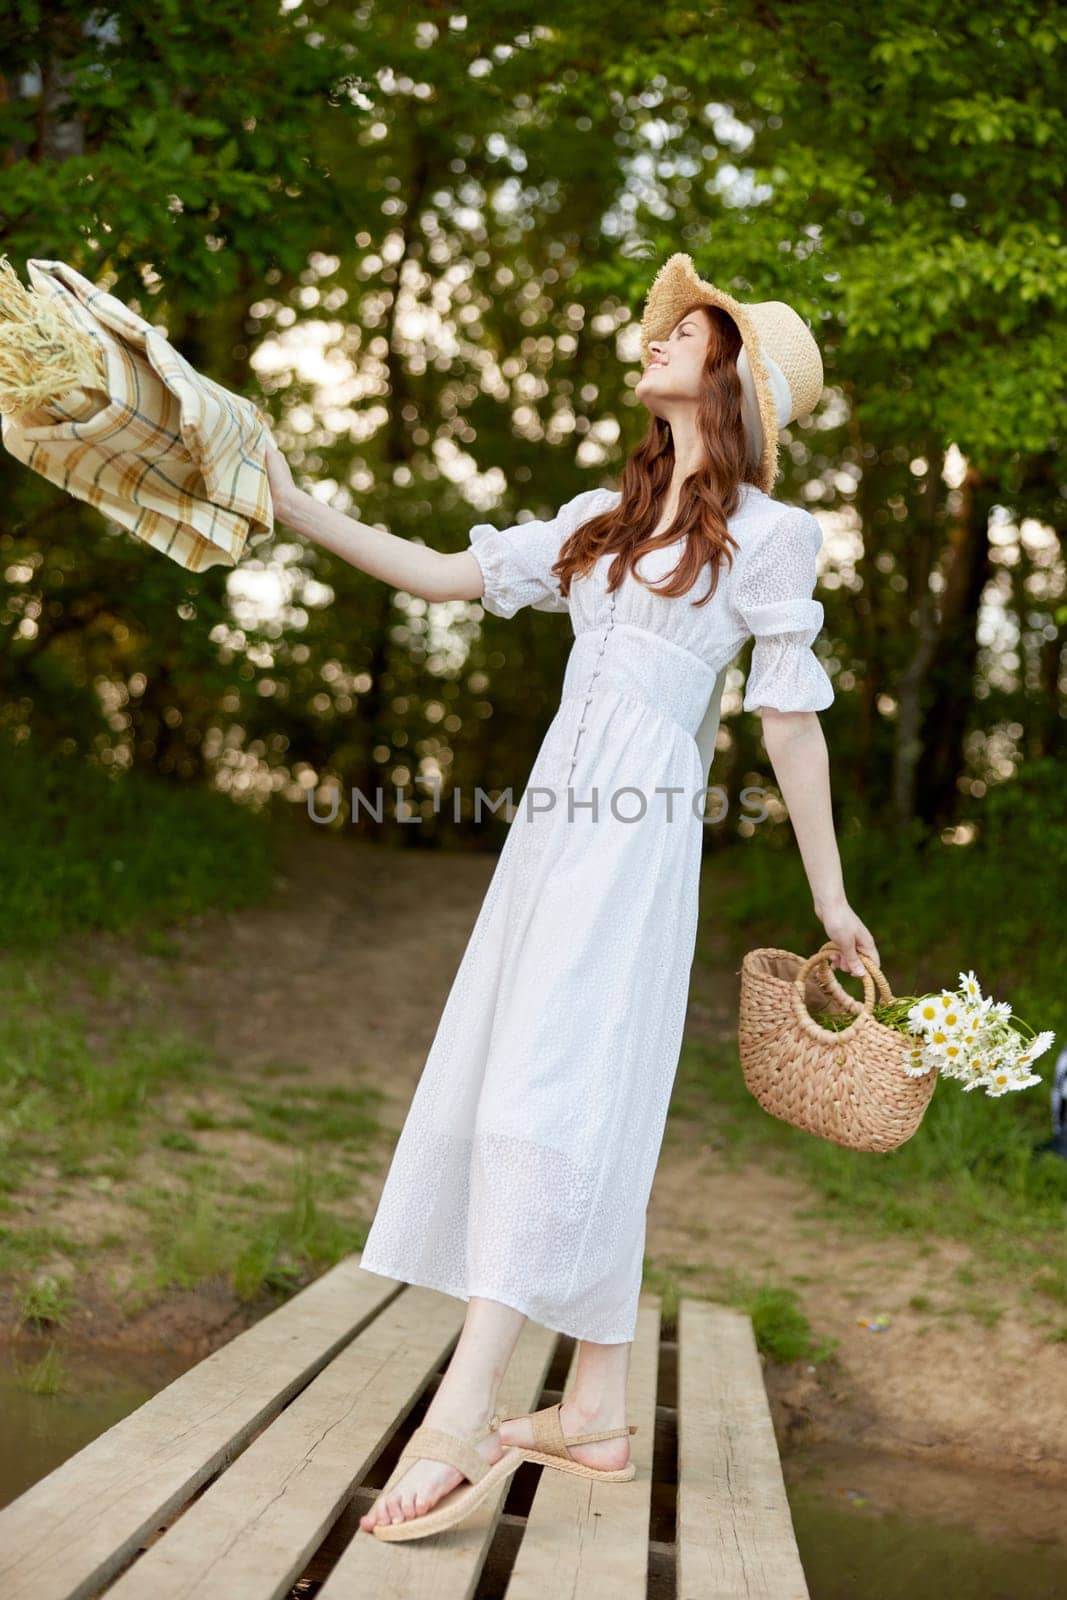 a woman in a light dress, with a plaid and a wicker basket in her hands, is spinning on the pier. High quality photo